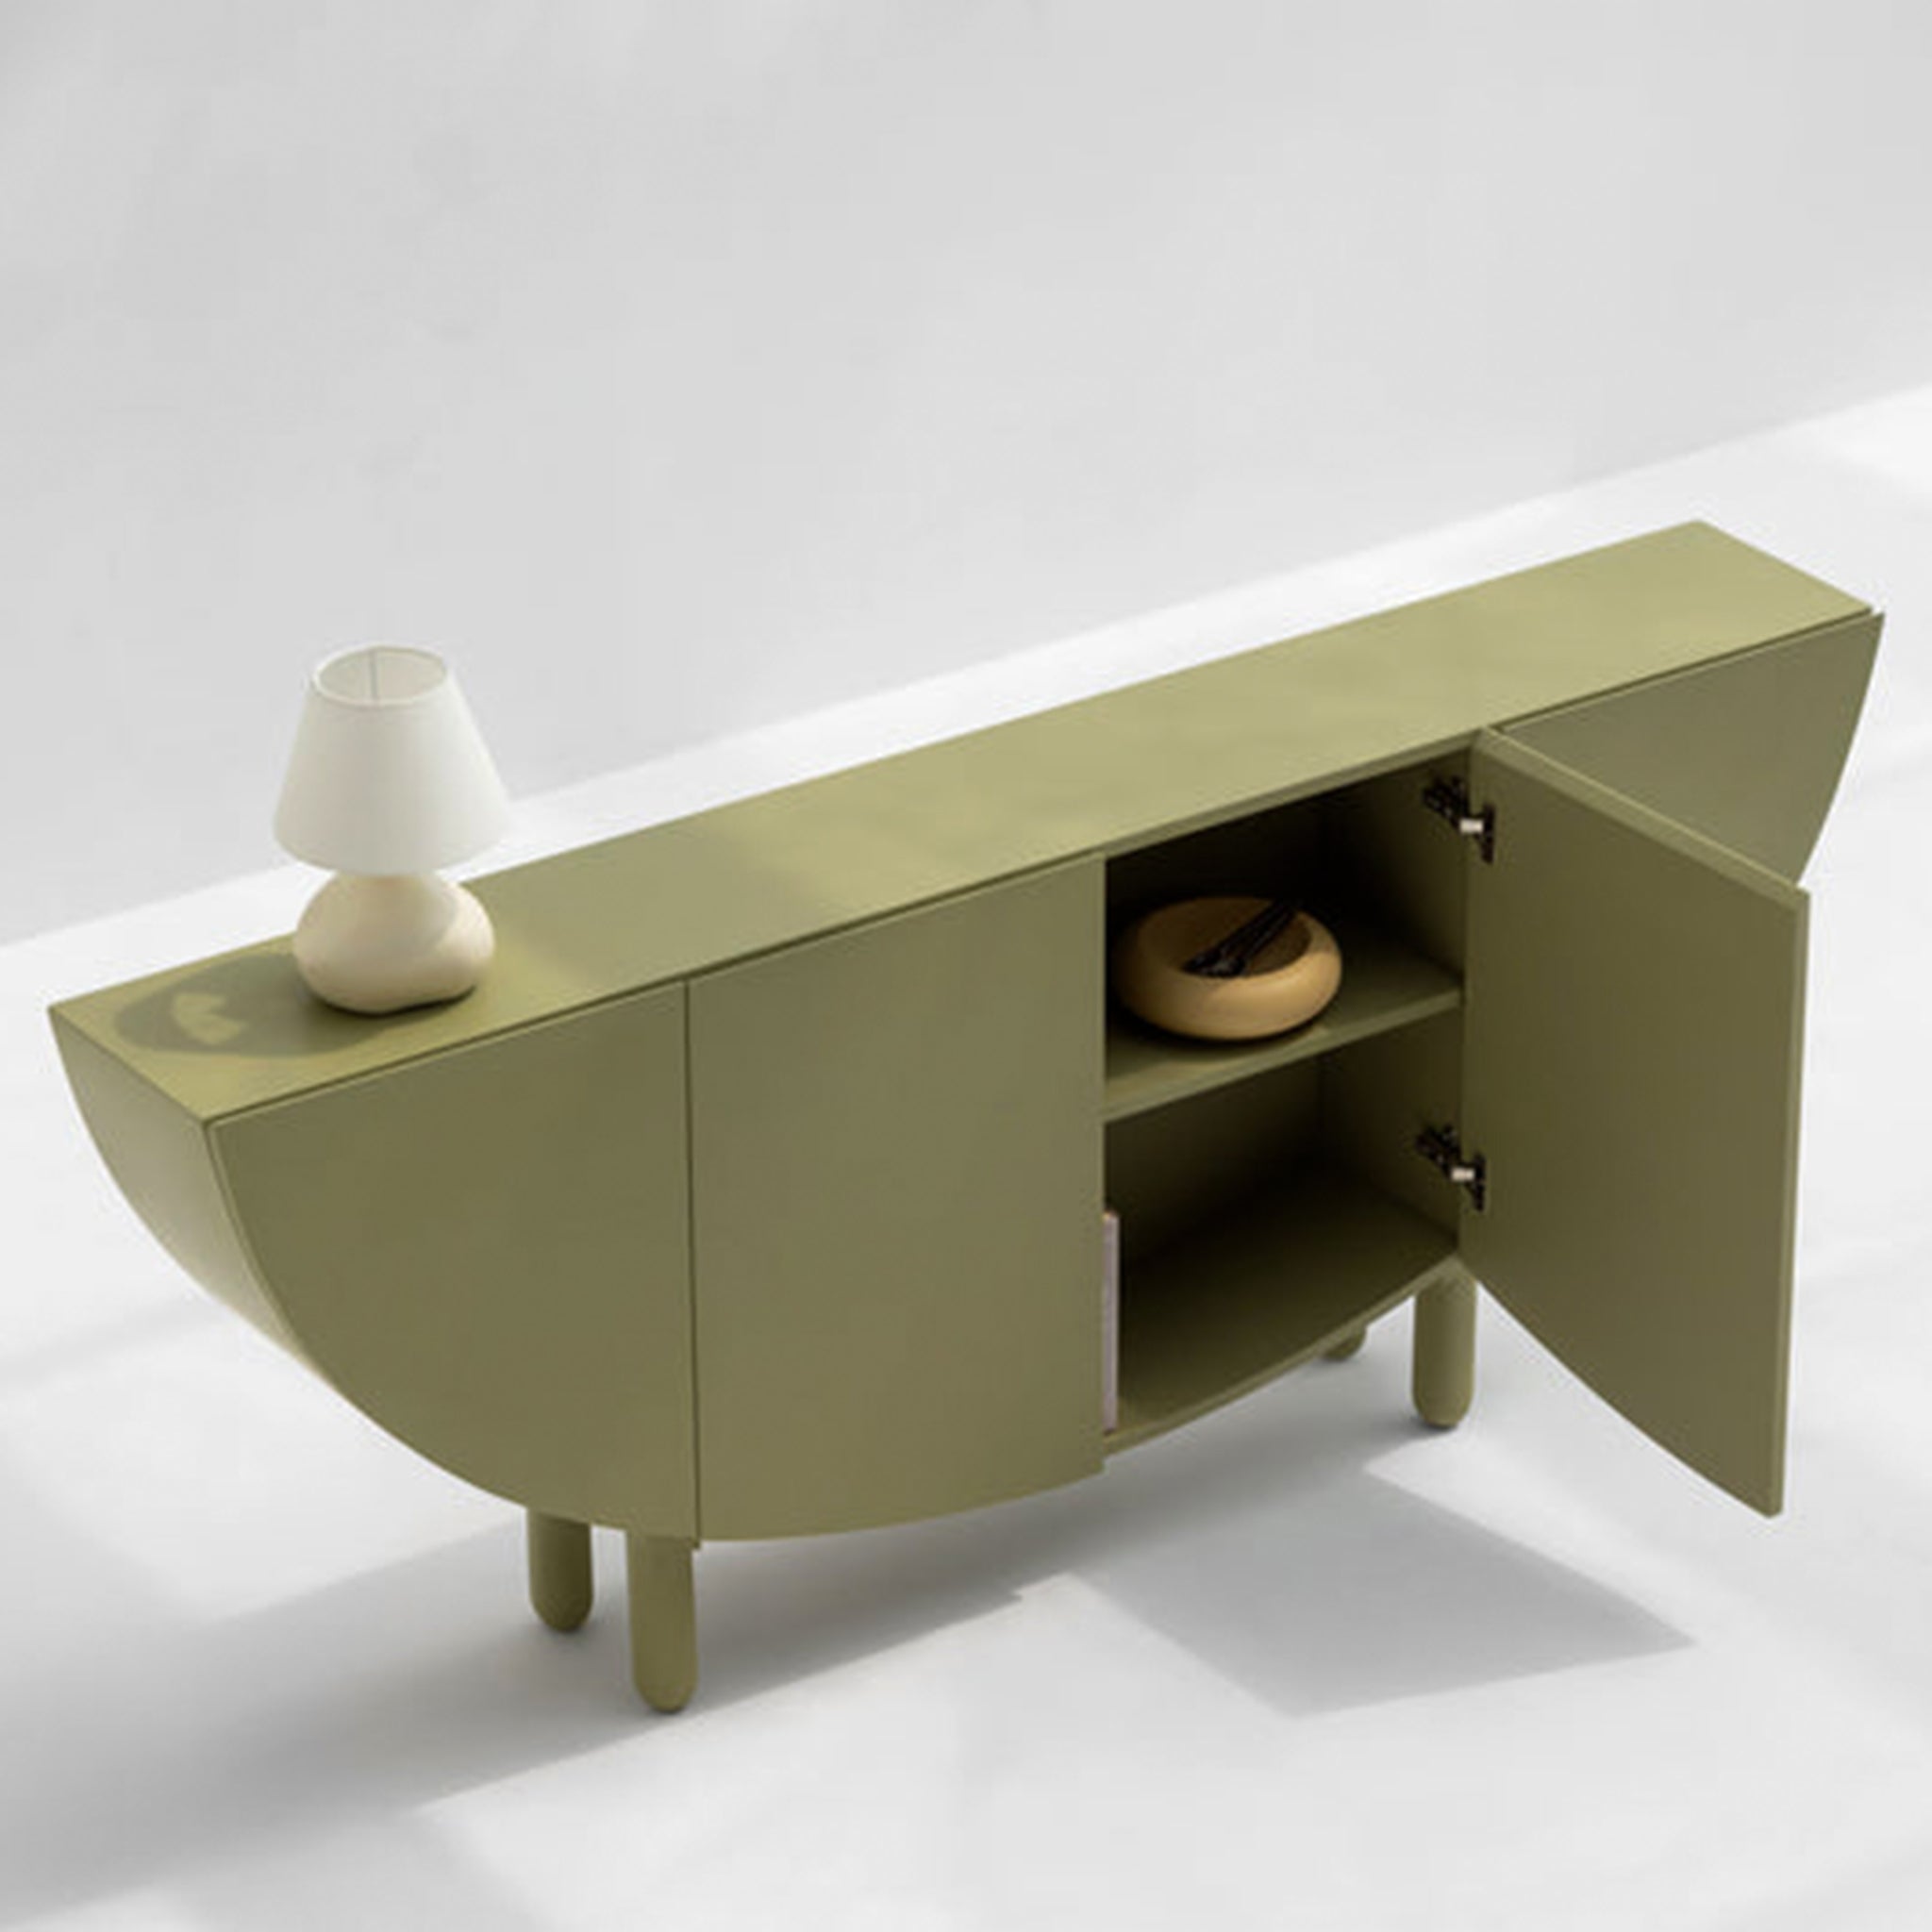 Top view of an olive green sideboard with a half-moon design, featuring an open compartment and a small white table lamp on top. One of the cabinet doors is open, revealing a bowl and other items inside, set against a light gray background.